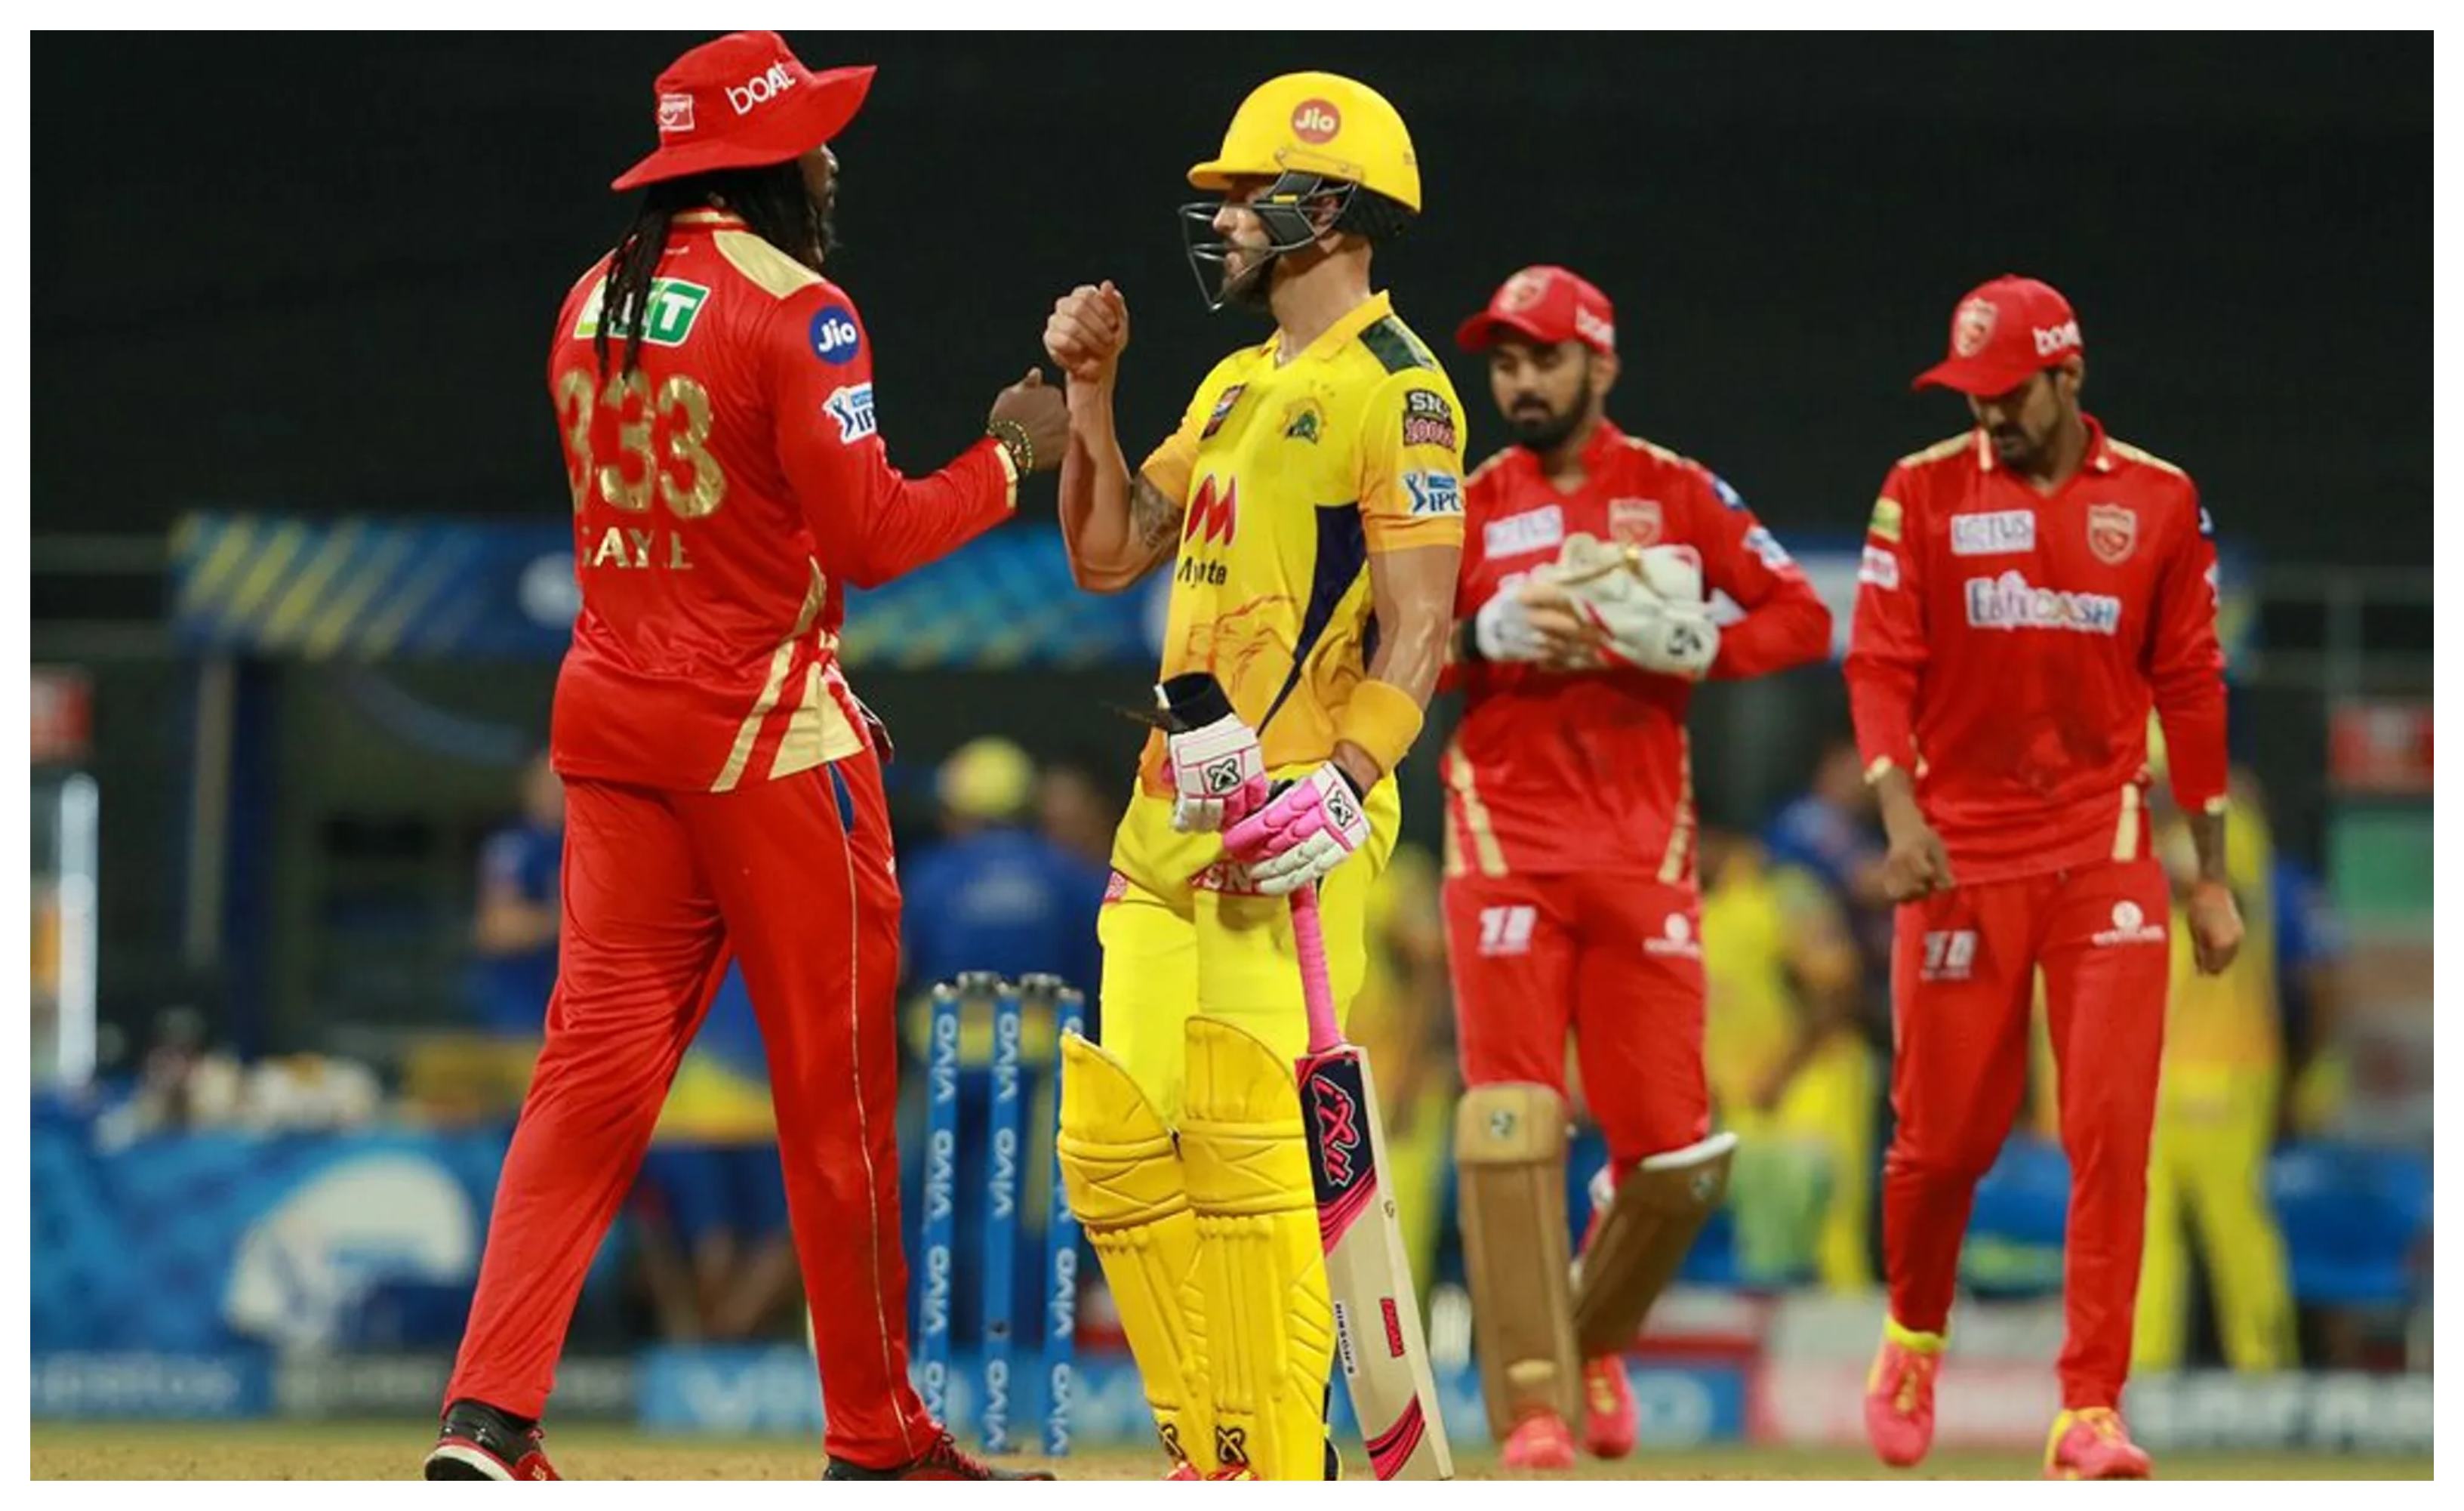 PBKS were outplayed by CSK in all departments | BCCI/IPL